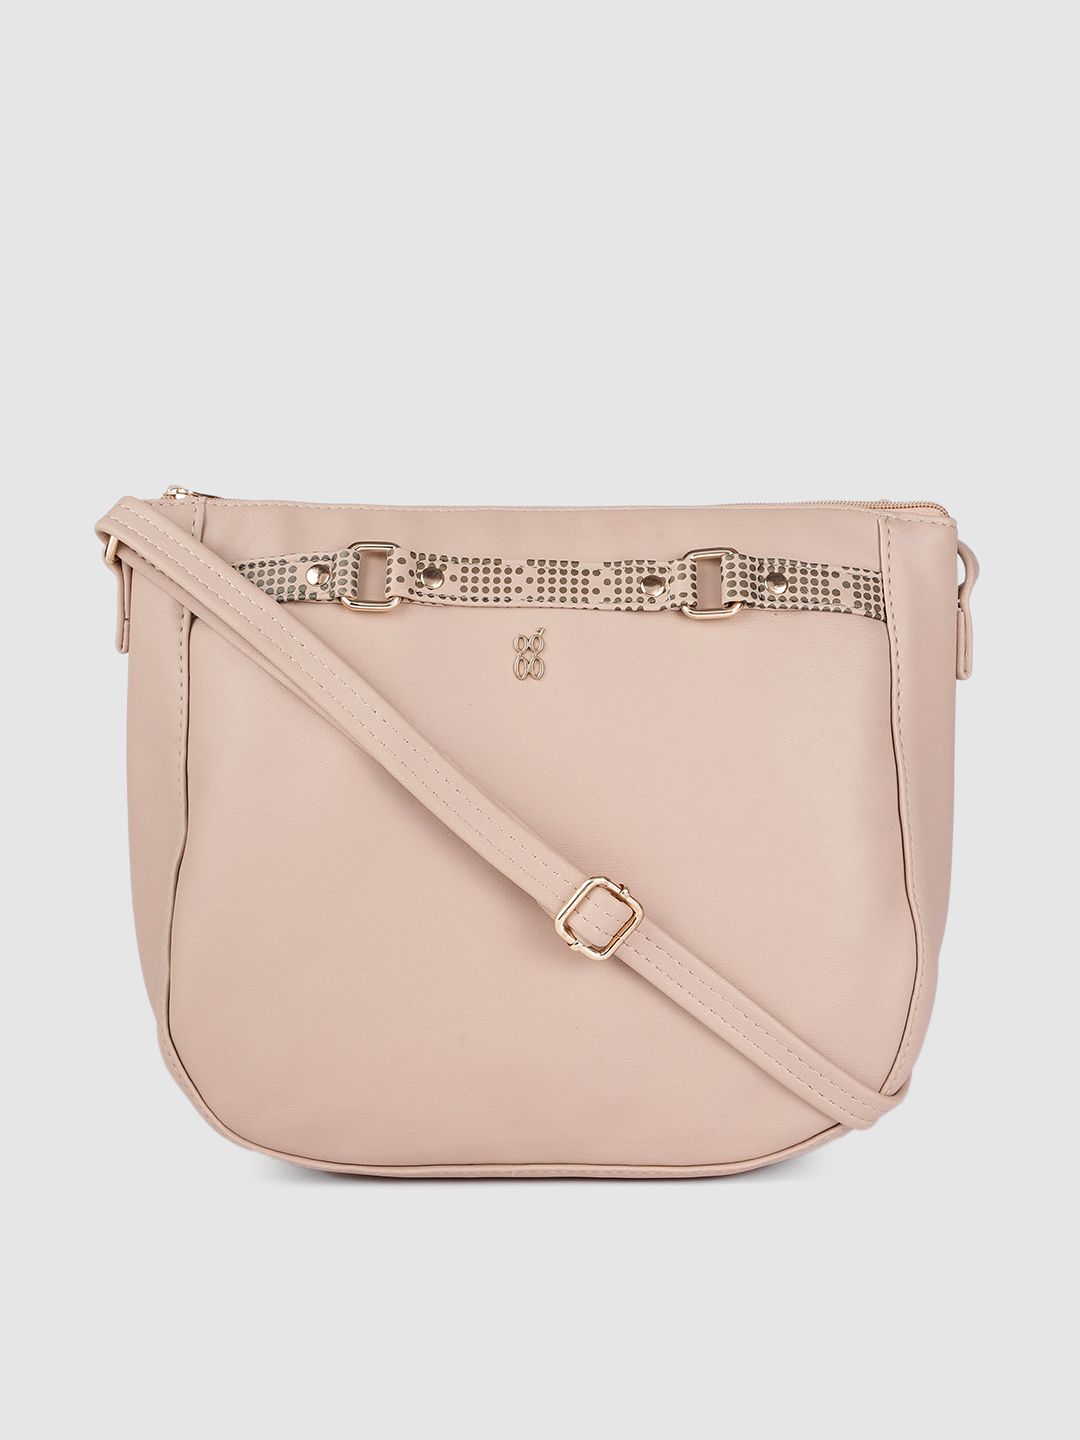 Baggit Women Beige Structured Sling Bag Price in India